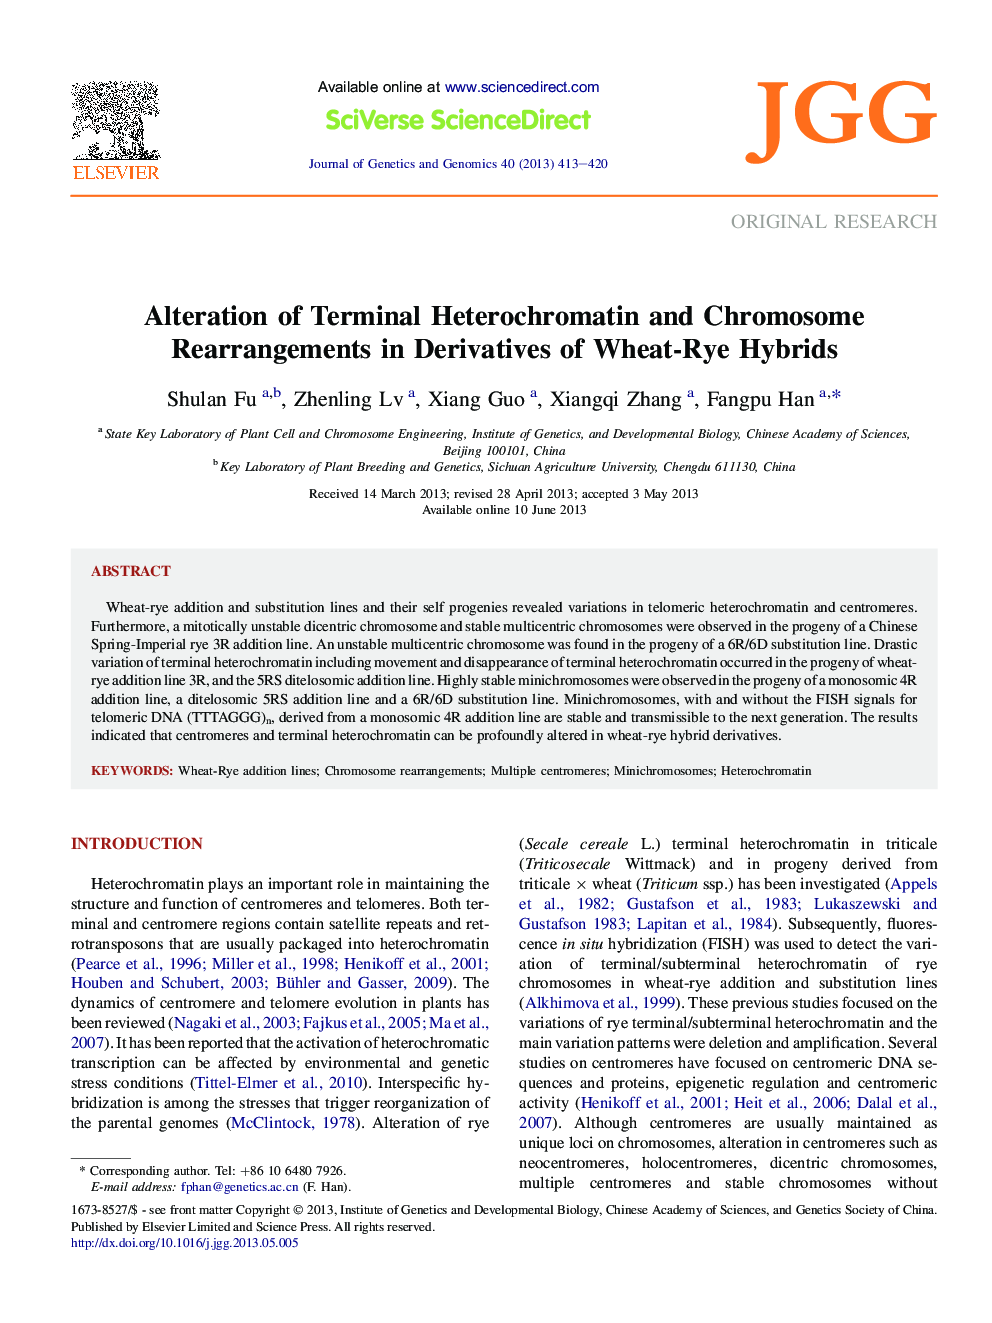 Alteration of Terminal Heterochromatin and Chromosome Rearrangements in Derivatives of Wheat-Rye Hybrids